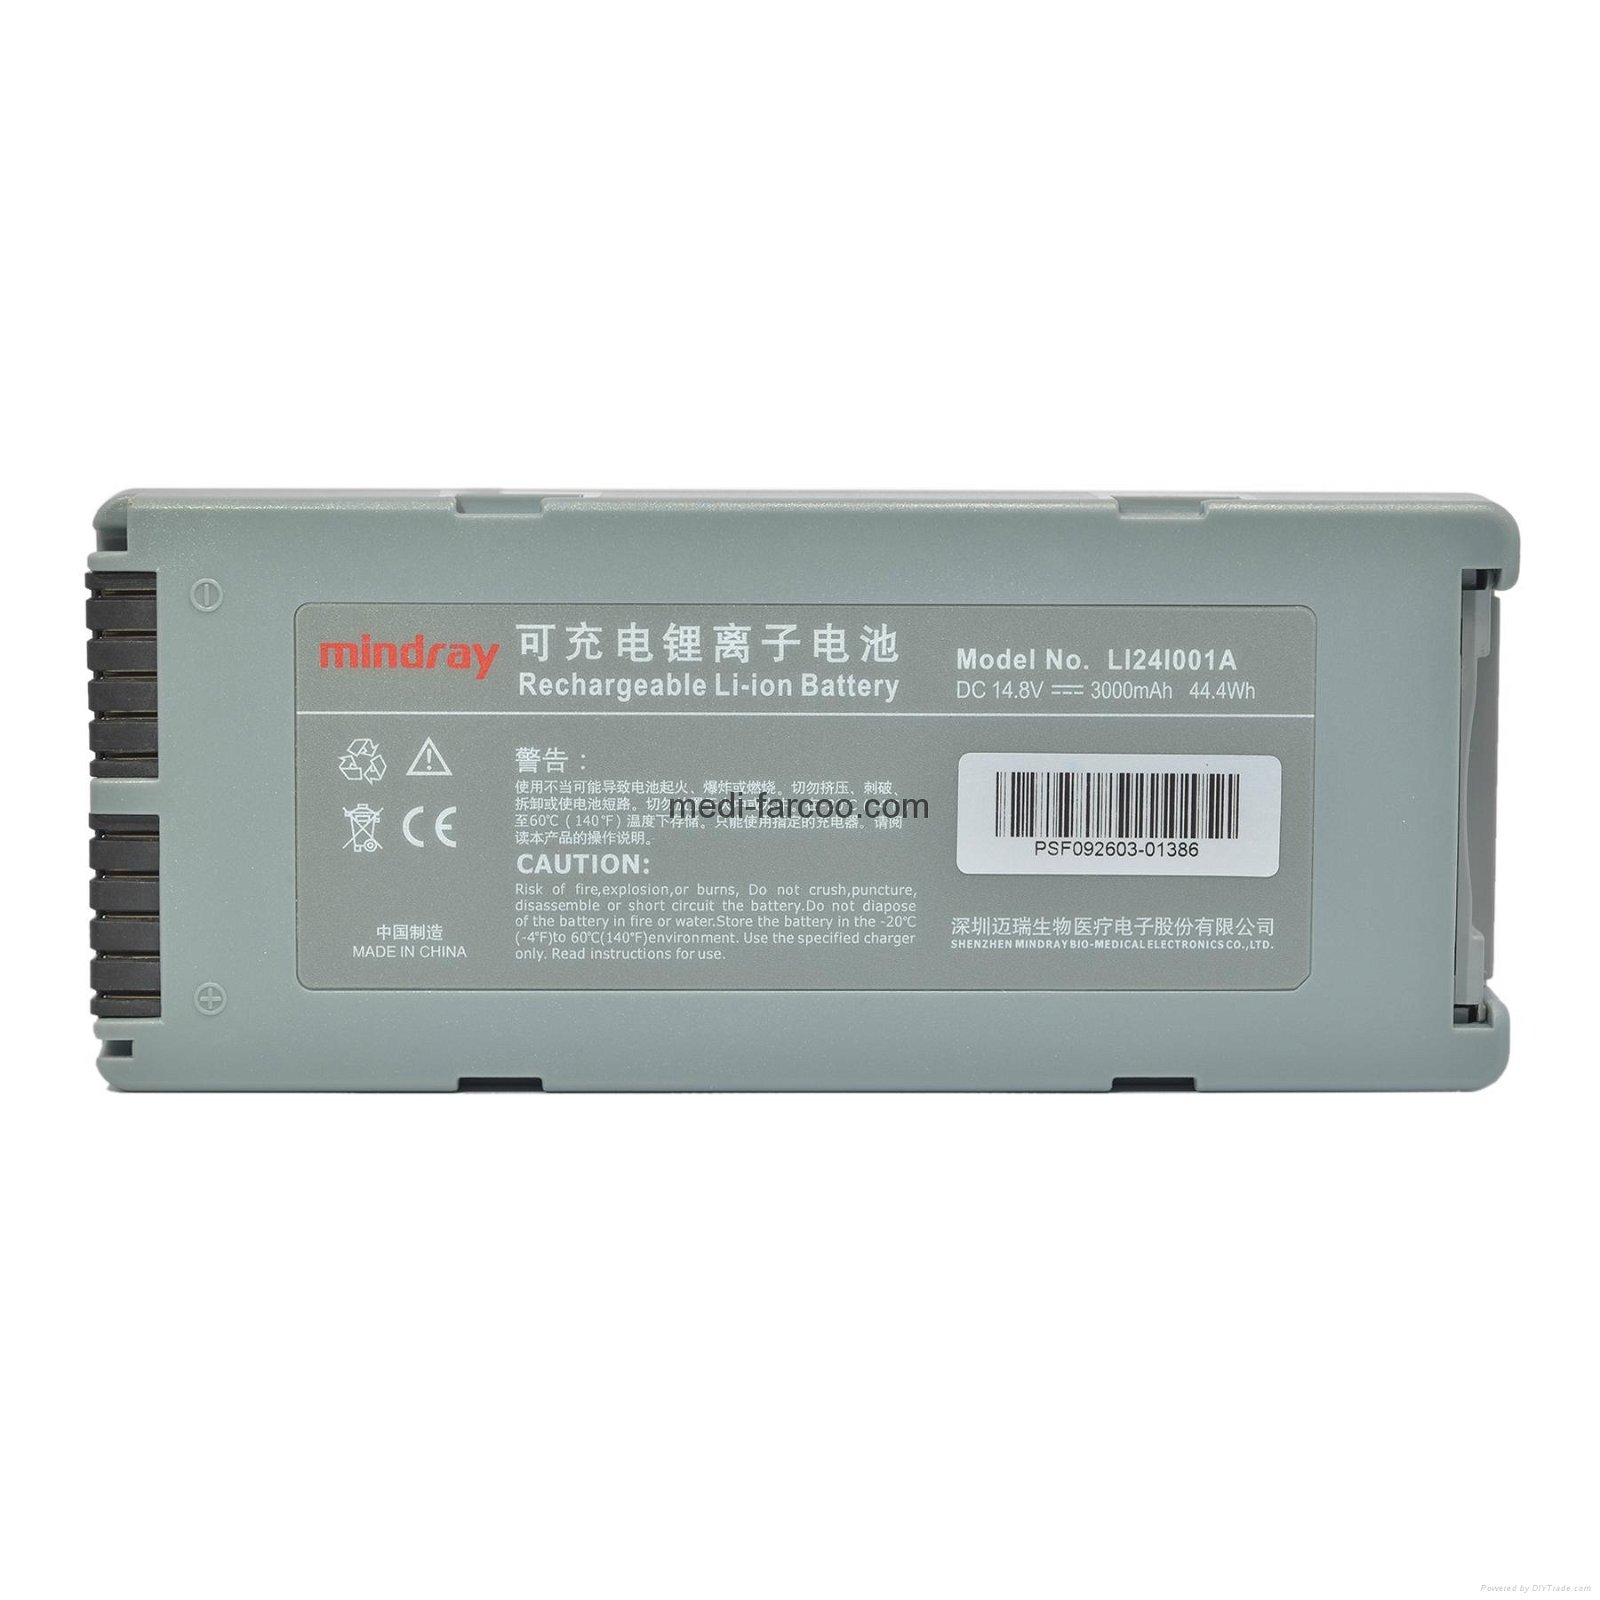 High Quality LI24I001A battery for Mindray D3 rechargable 5